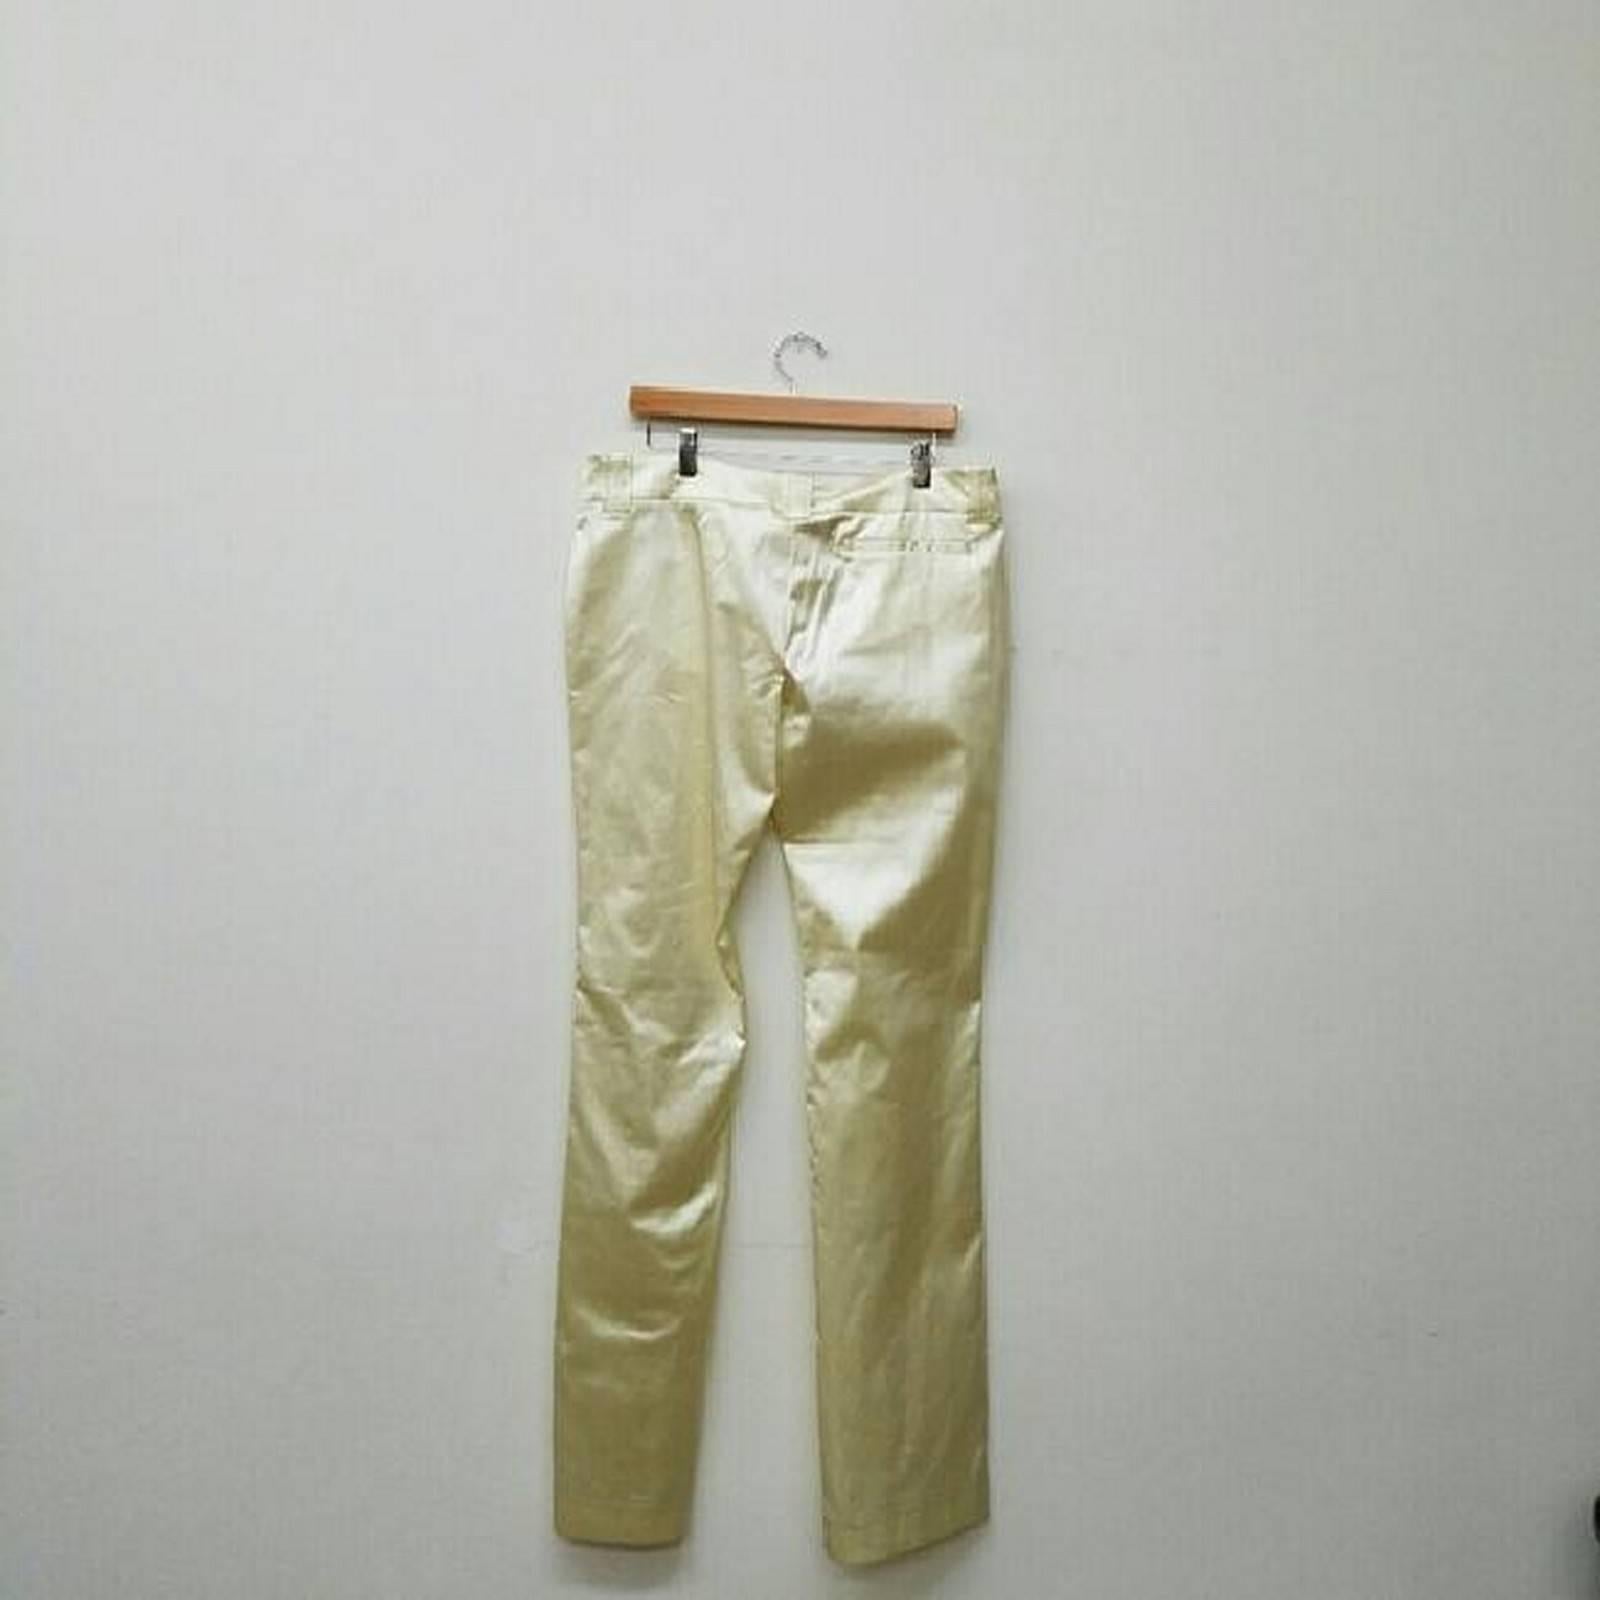 Roberto Cavalli Casual Trousers Pants

Brand new. Never used. Tags still attached.

Type:Pants
Size:14 (L, 34)
Color:yellow gold
Brand:Roberto Cavalli
Style/Collection:Brand new. Never used. Tags still attached.